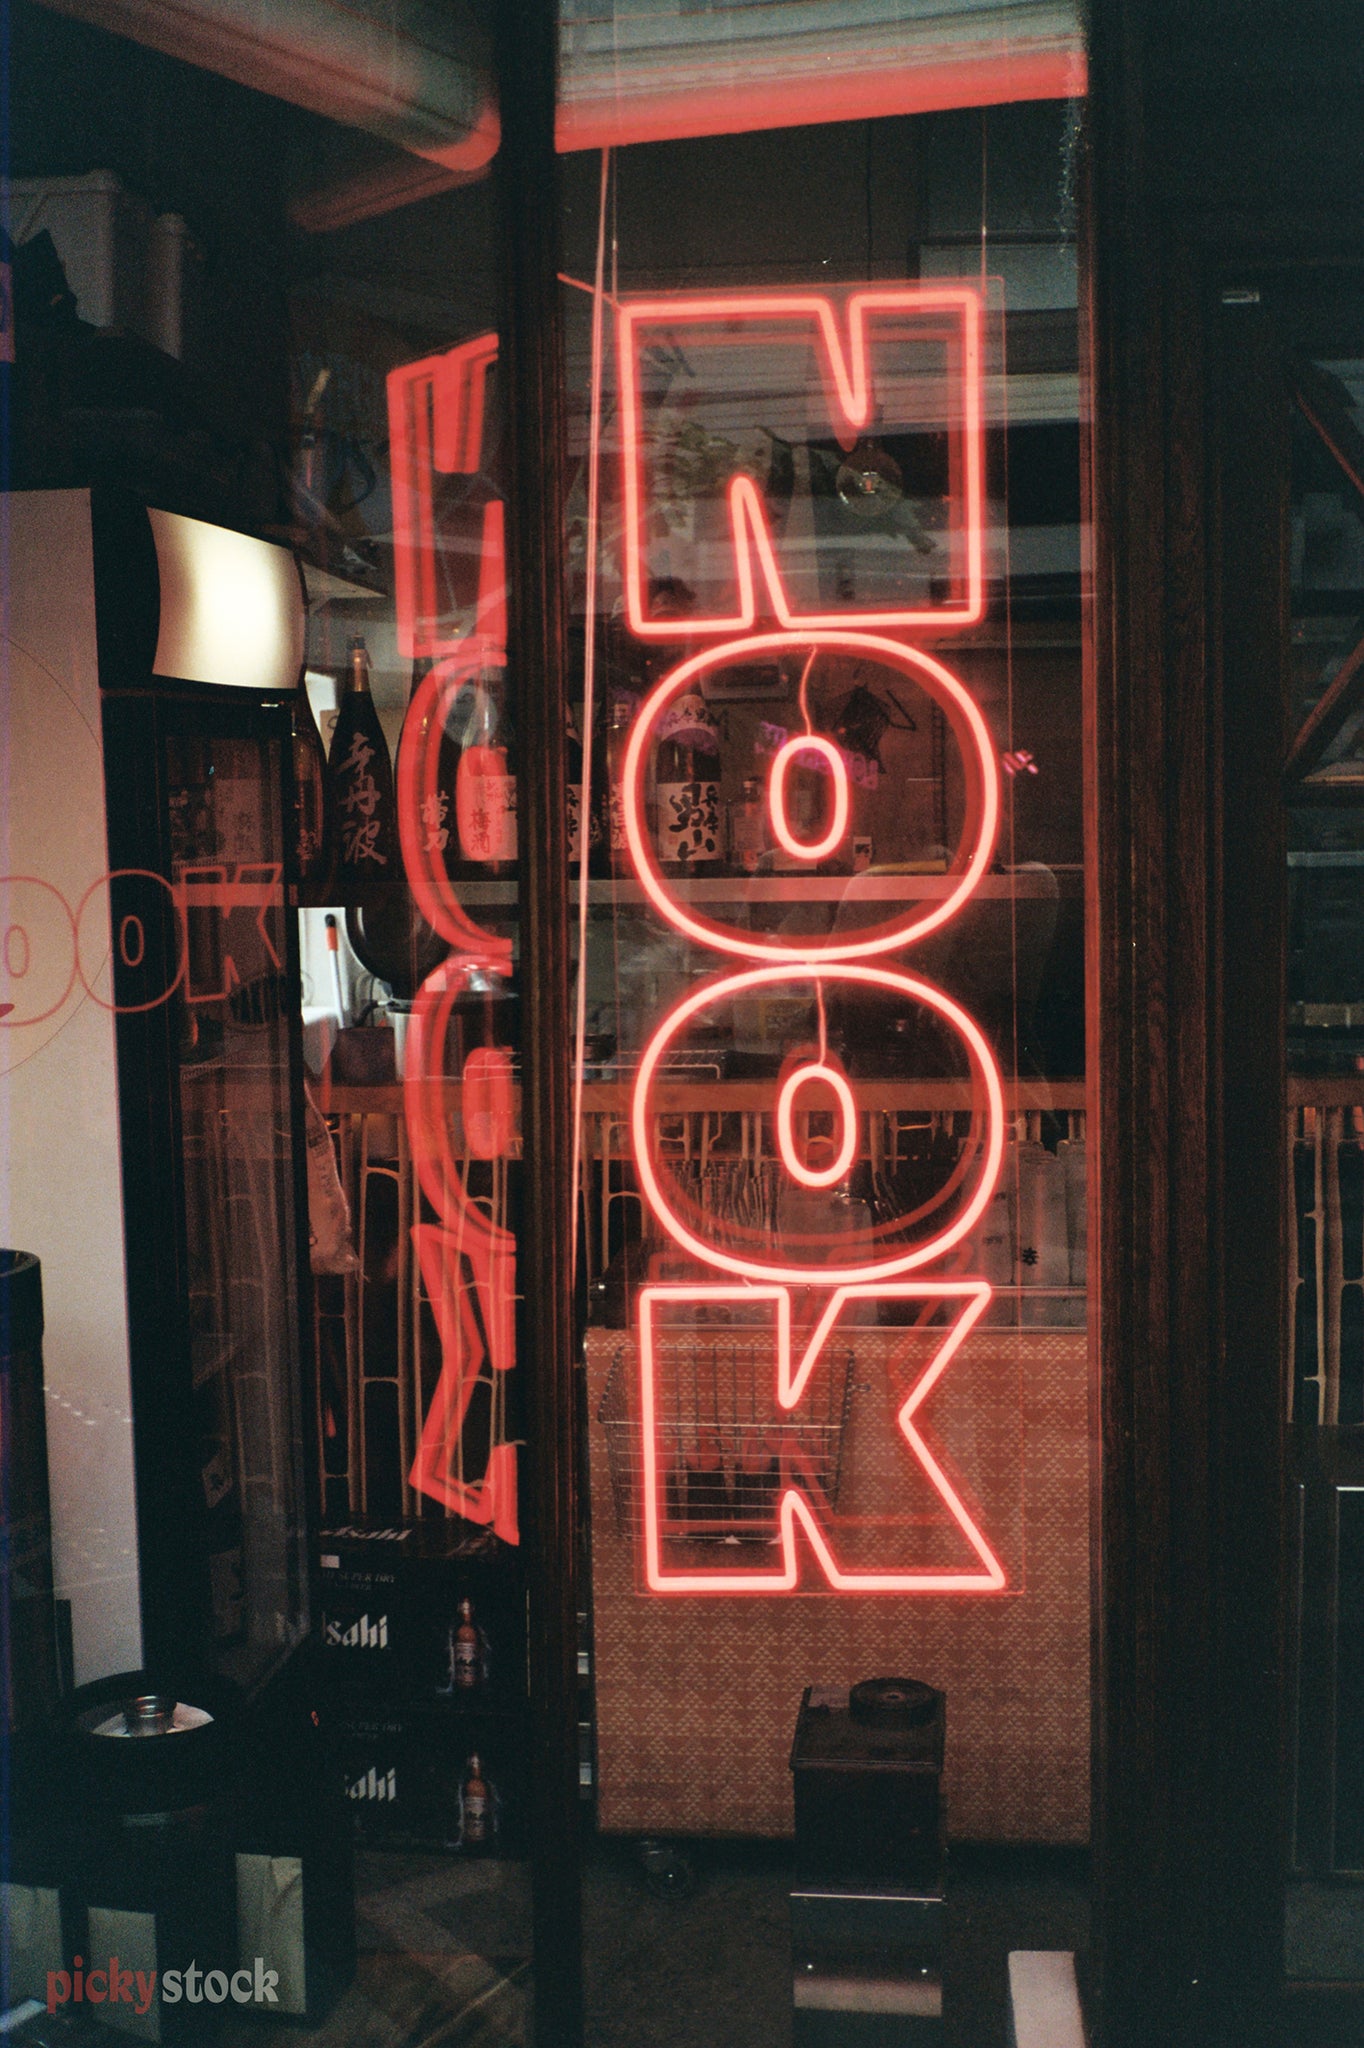 A neon red sign with the word "NOOK" hangs in the window of a shop on Karangahape Road, Auckland Central. The lights reflect off the glass. 